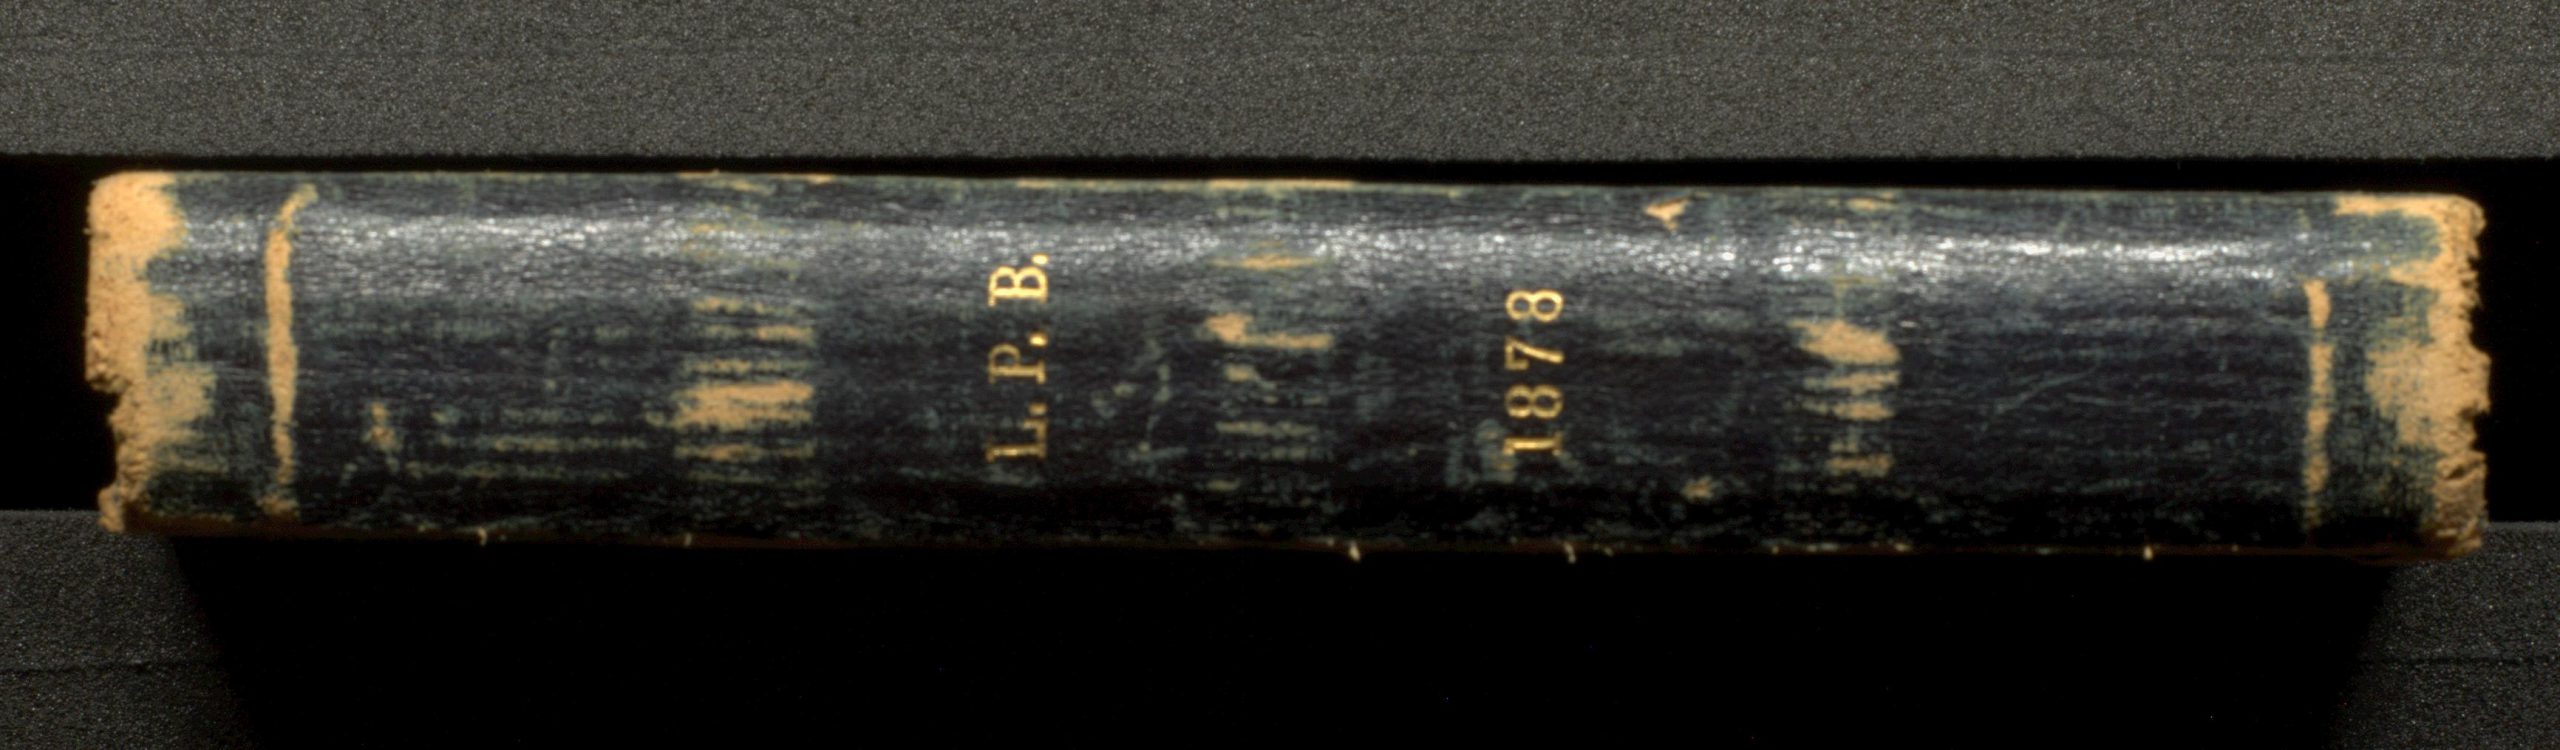 Photograph showing spine of diary, with the monograph 'L.P.B' and the year '1878' in gold lettering.